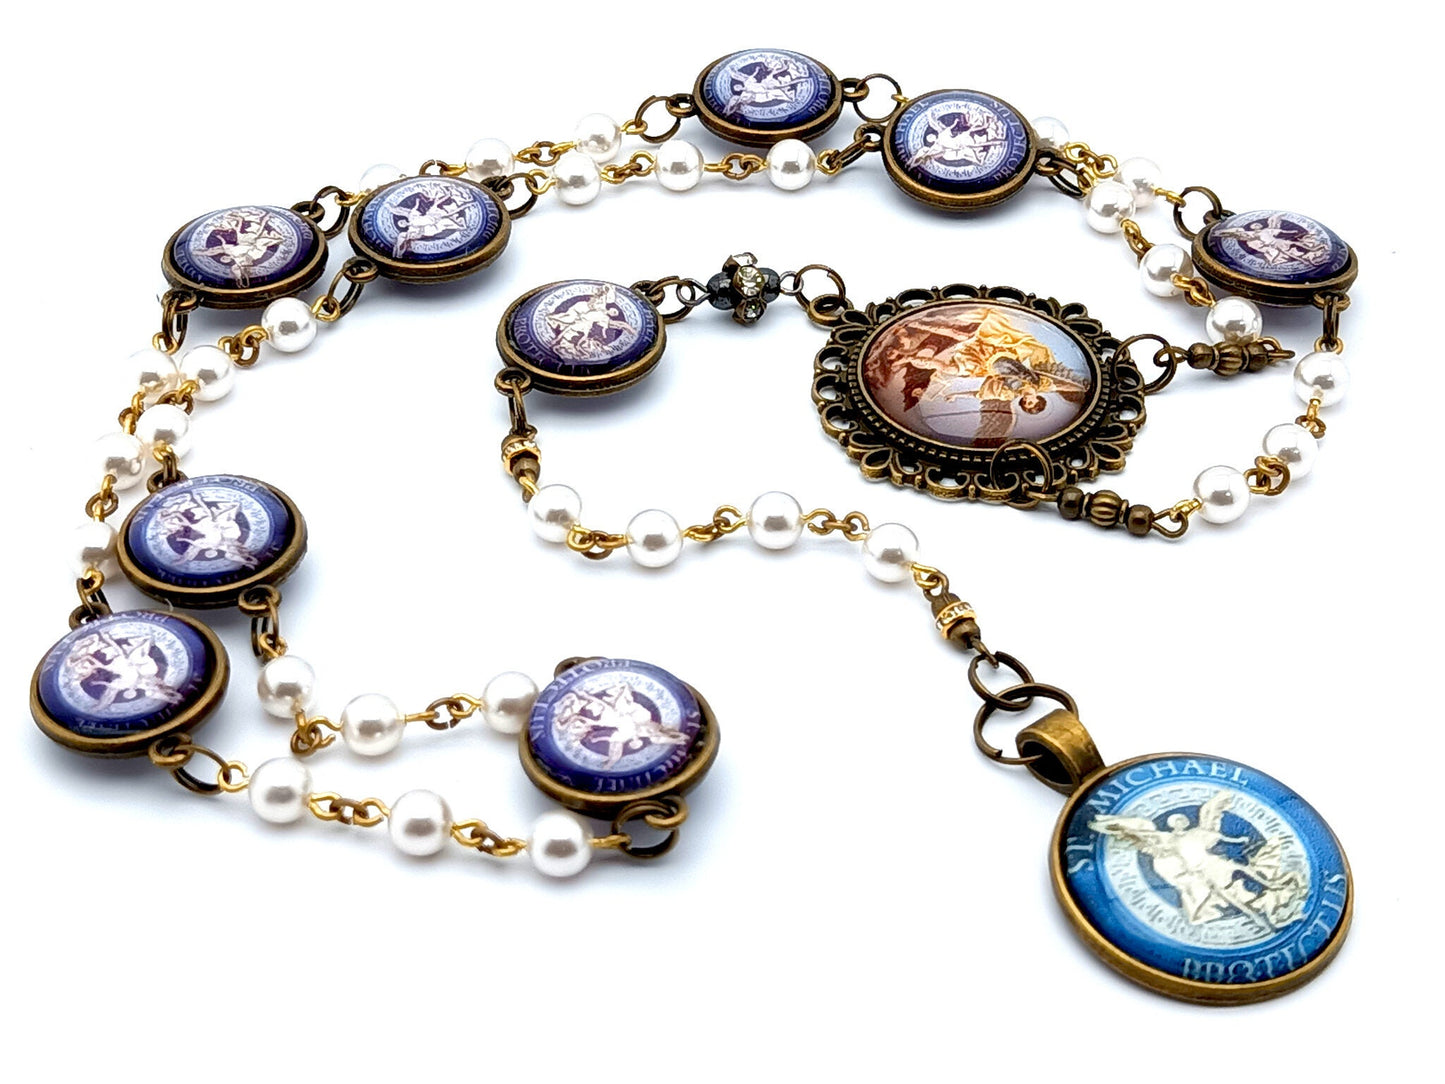 Saint Michael unique rosary beads vintage style pearl prayer chaplet with domed Saint Michael linking picture medals and large brass domed picture medal.